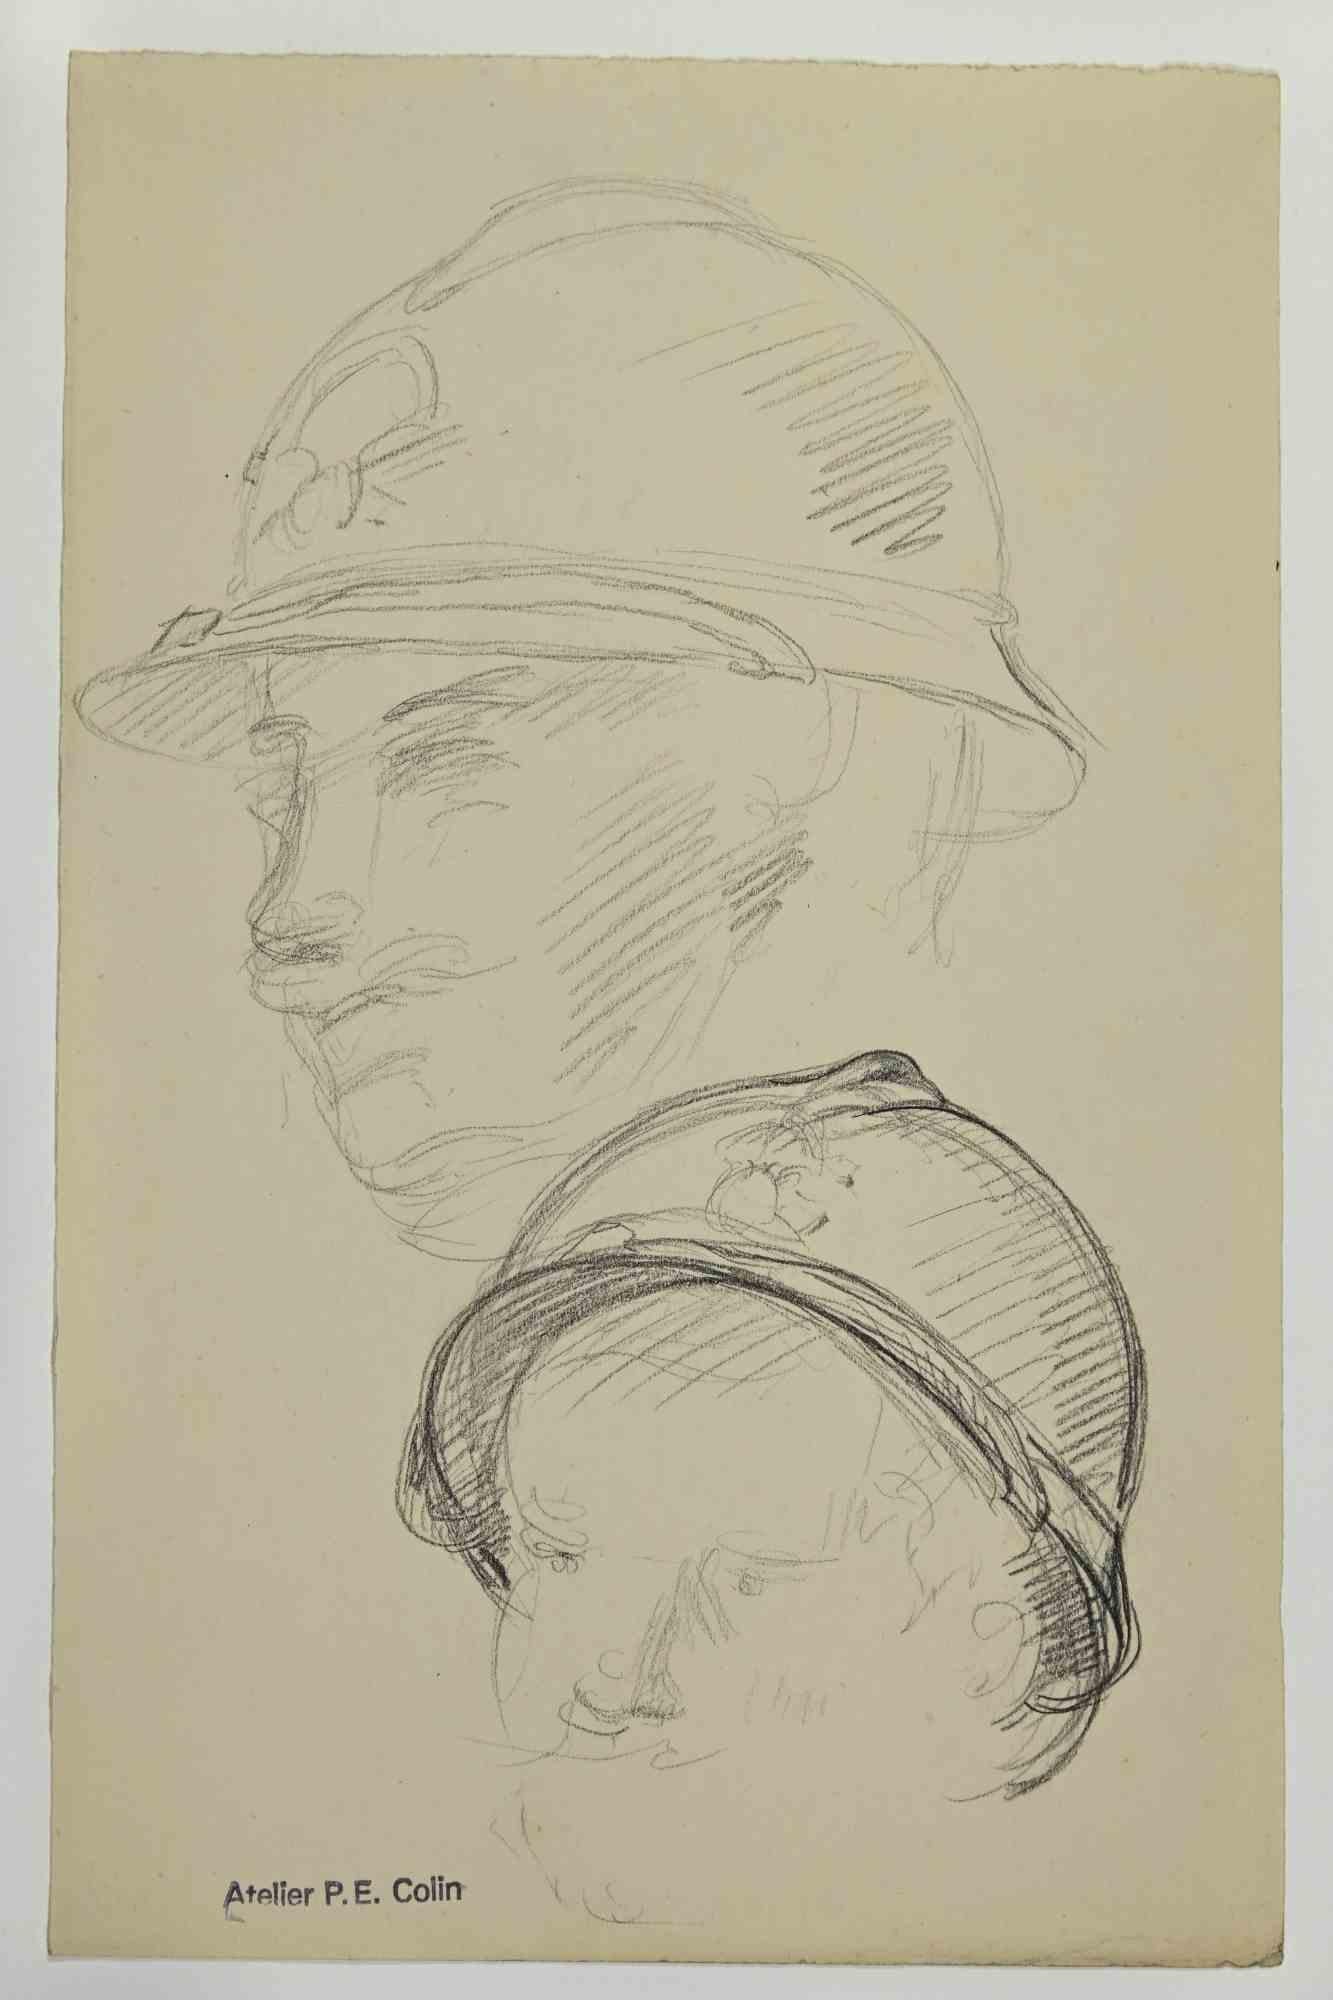 Soldiers Paraglider is a drawing realized by Paul Emile Colin in the Early 20th Century.

Carbon Pencil on ivory-colored paper

Stamped on the lower.

Good conditions with slight foxing.

The artwork is realized through deft expressive strokes.